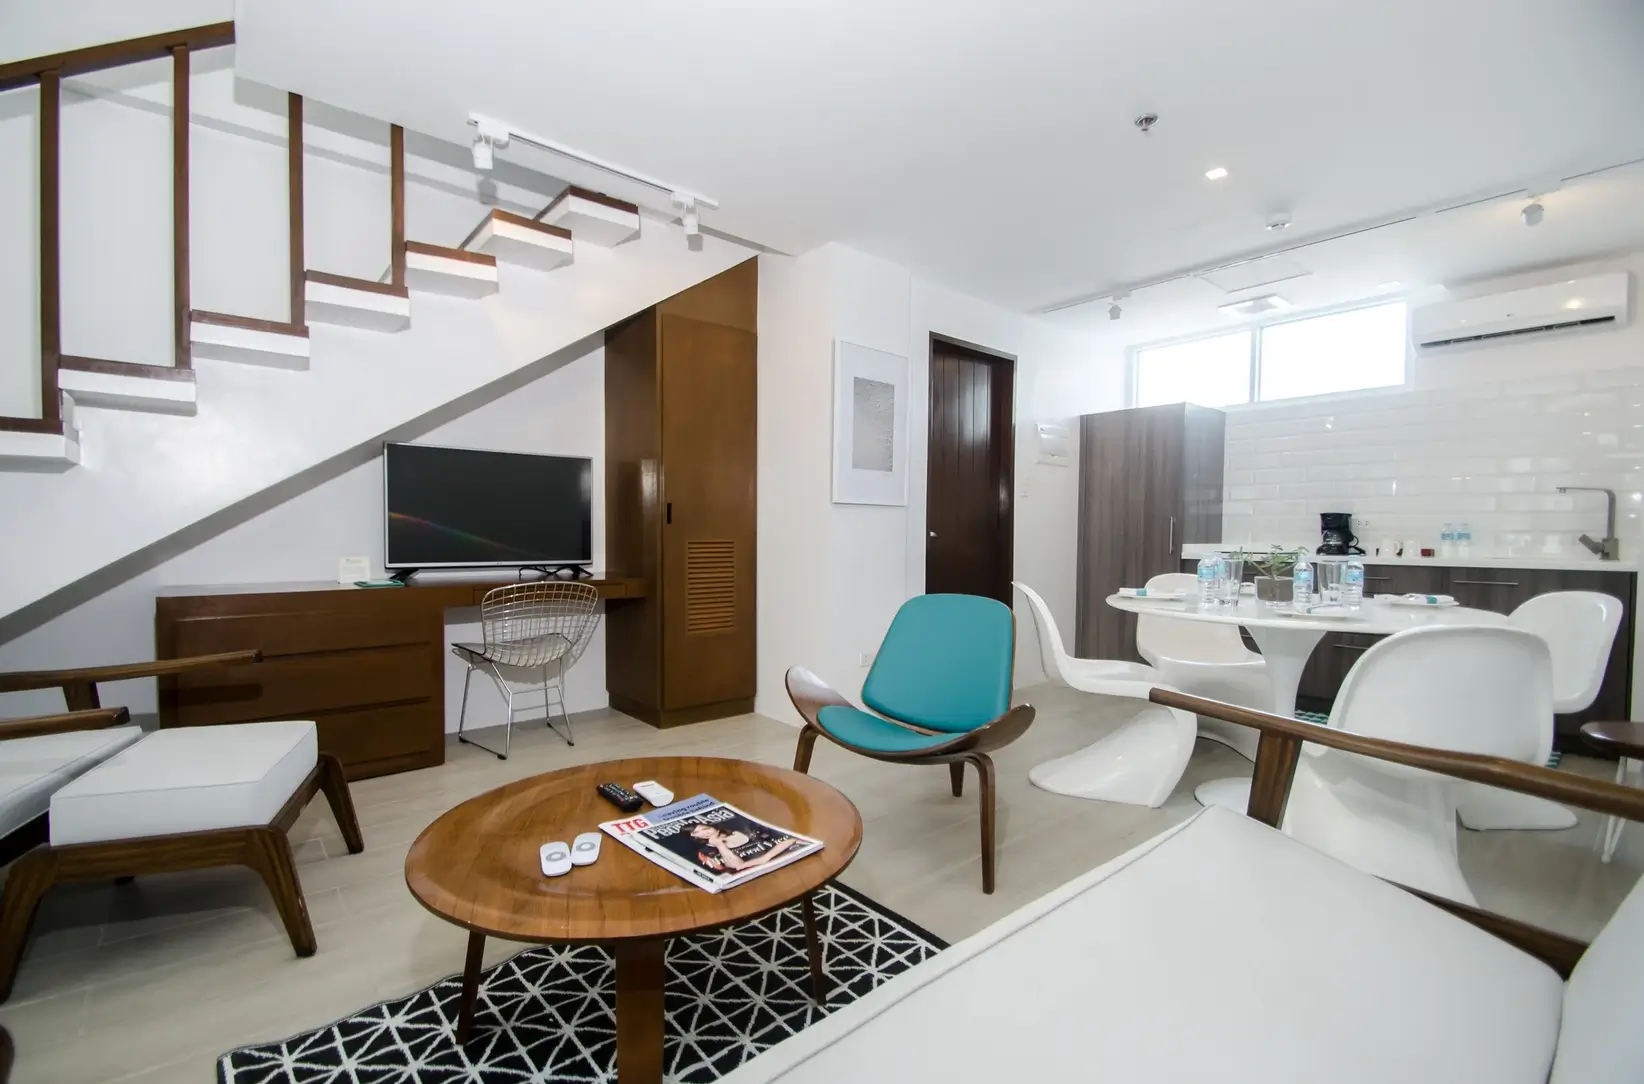 Modern loft-style room at Coast Boracay, featuring a minimalistic design with a TV, a small dining area, and an open stairway leading to the upper level. The room combines white walls and dark wood accents, creating a contemporary, inviting space.